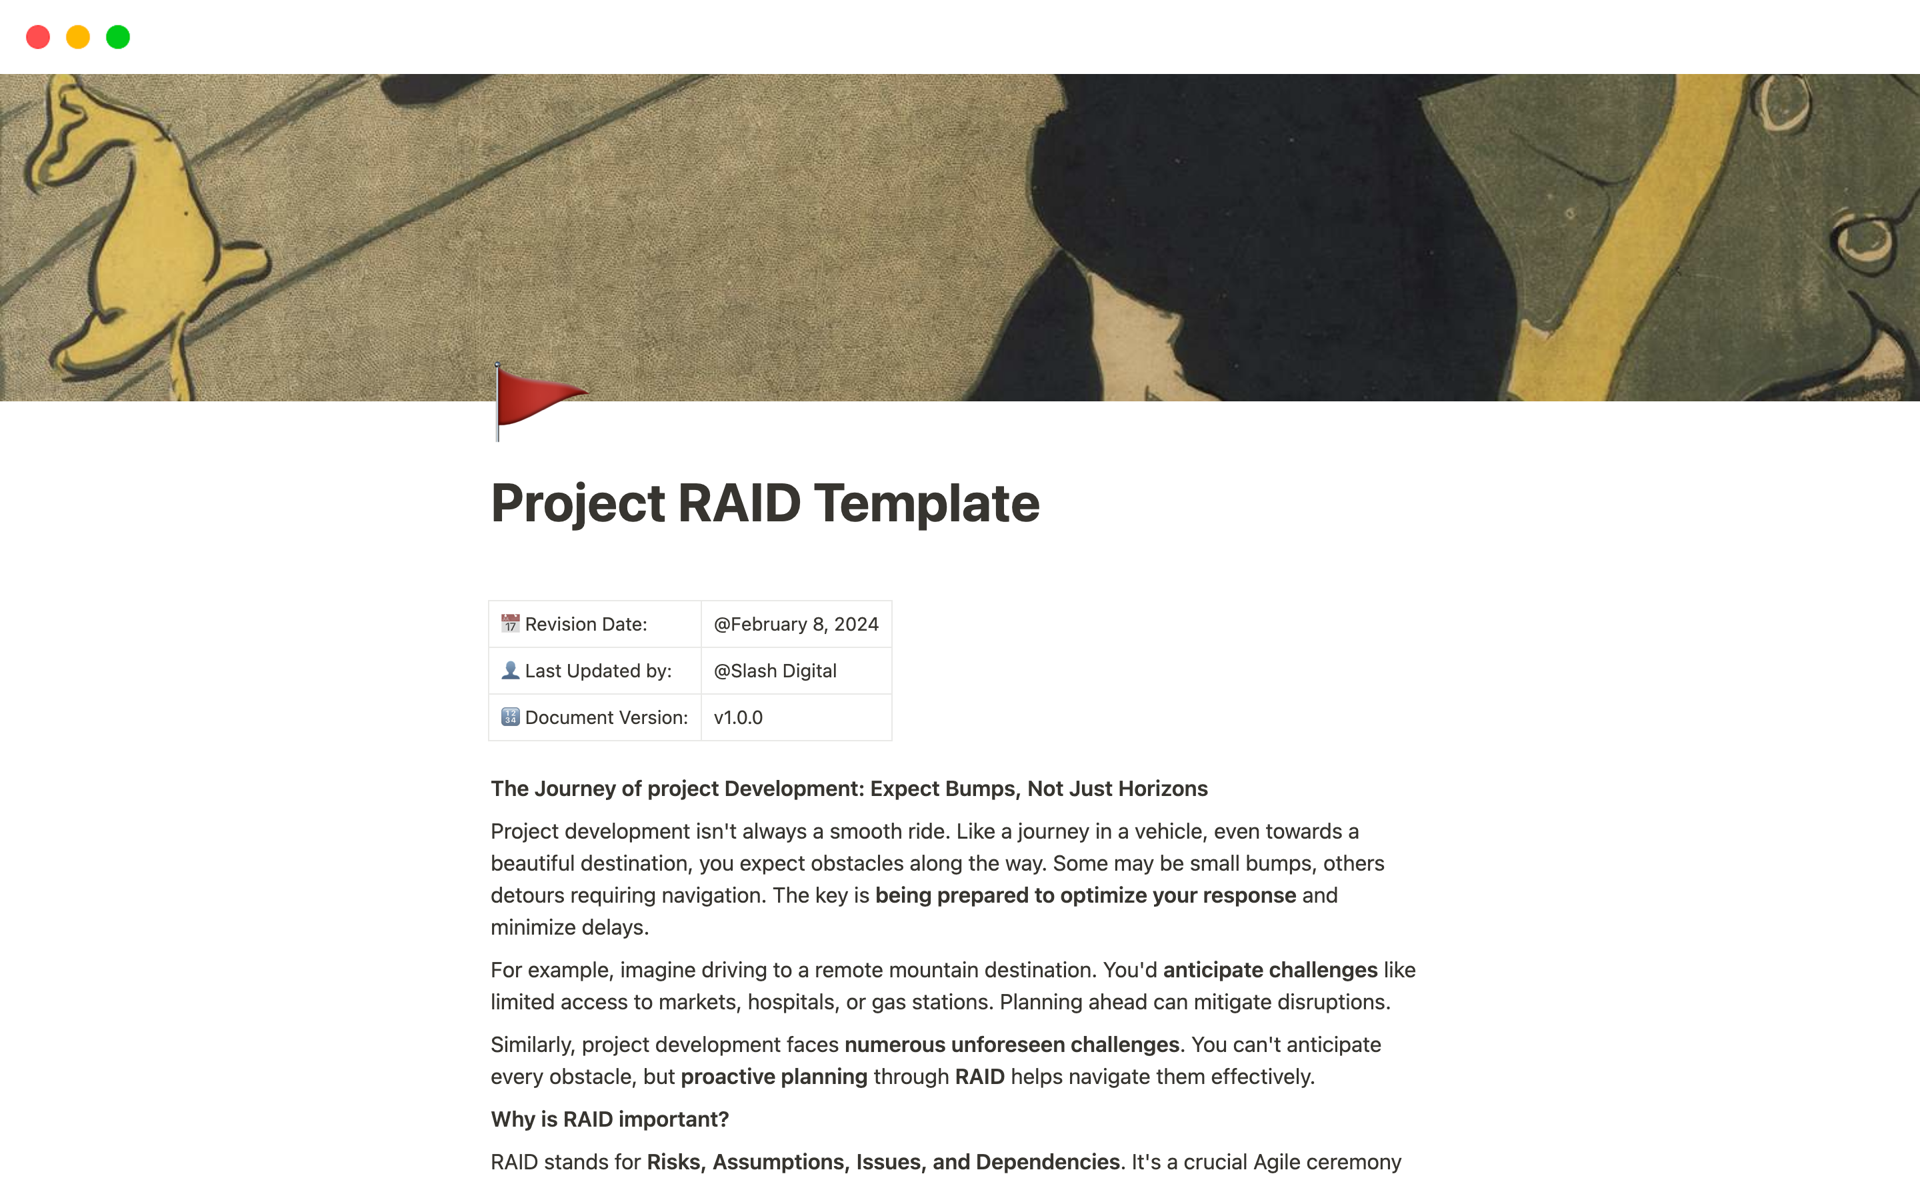 A template preview for Project RAID